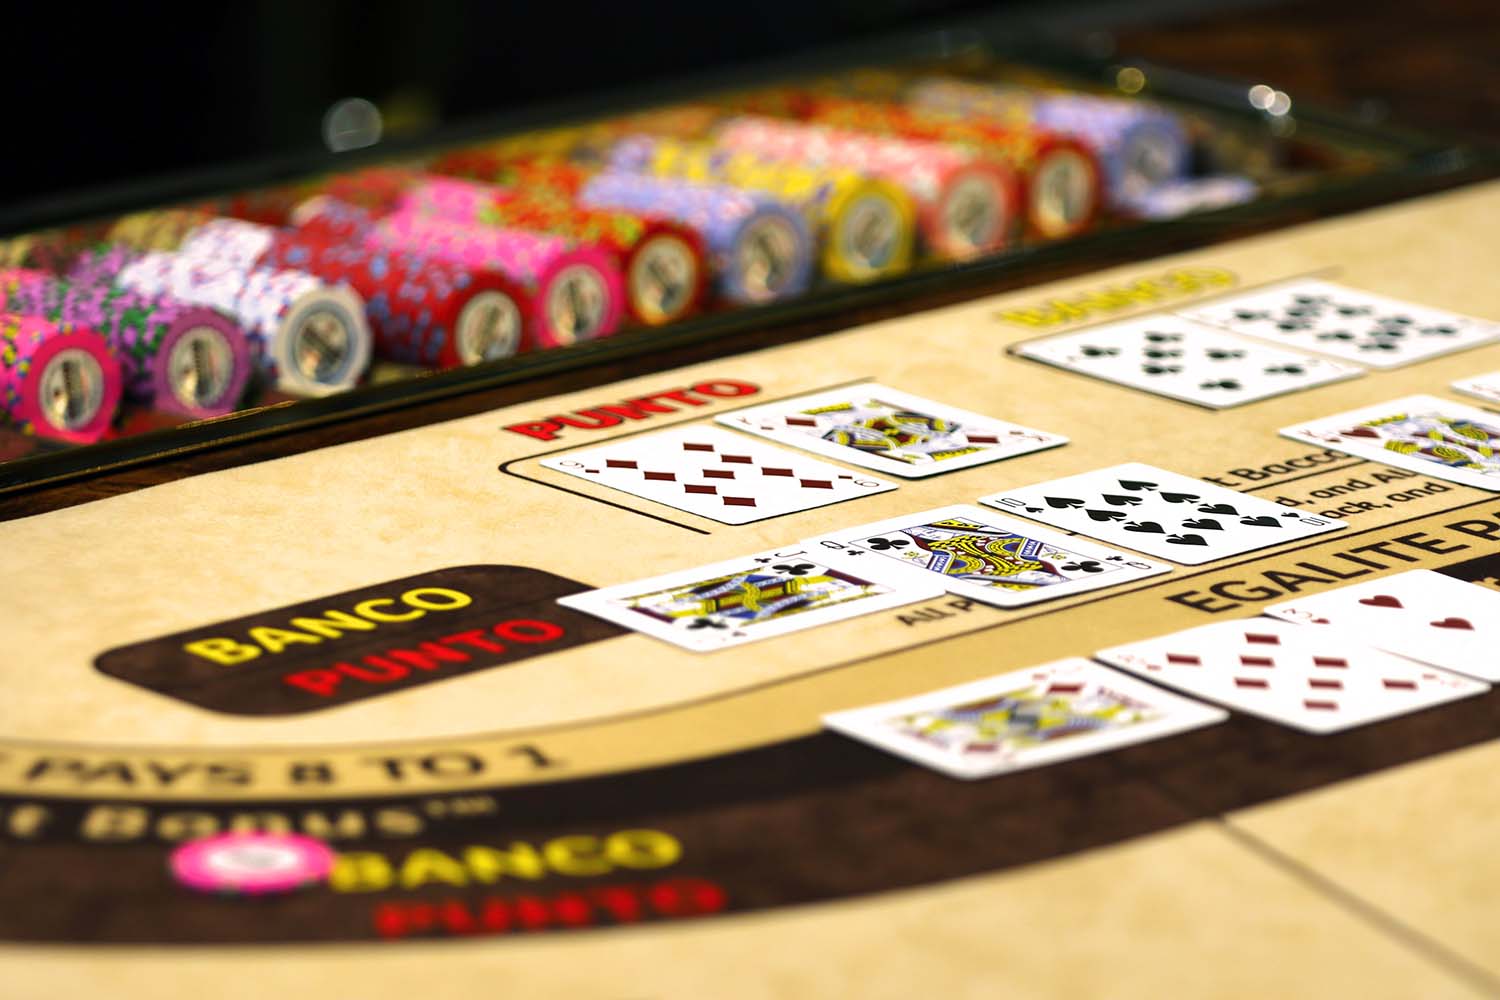 Tired of Playing at the Same Old Casinos? The Newest UK Casinos Have a Variety of Games, Generous Bonuses, and More